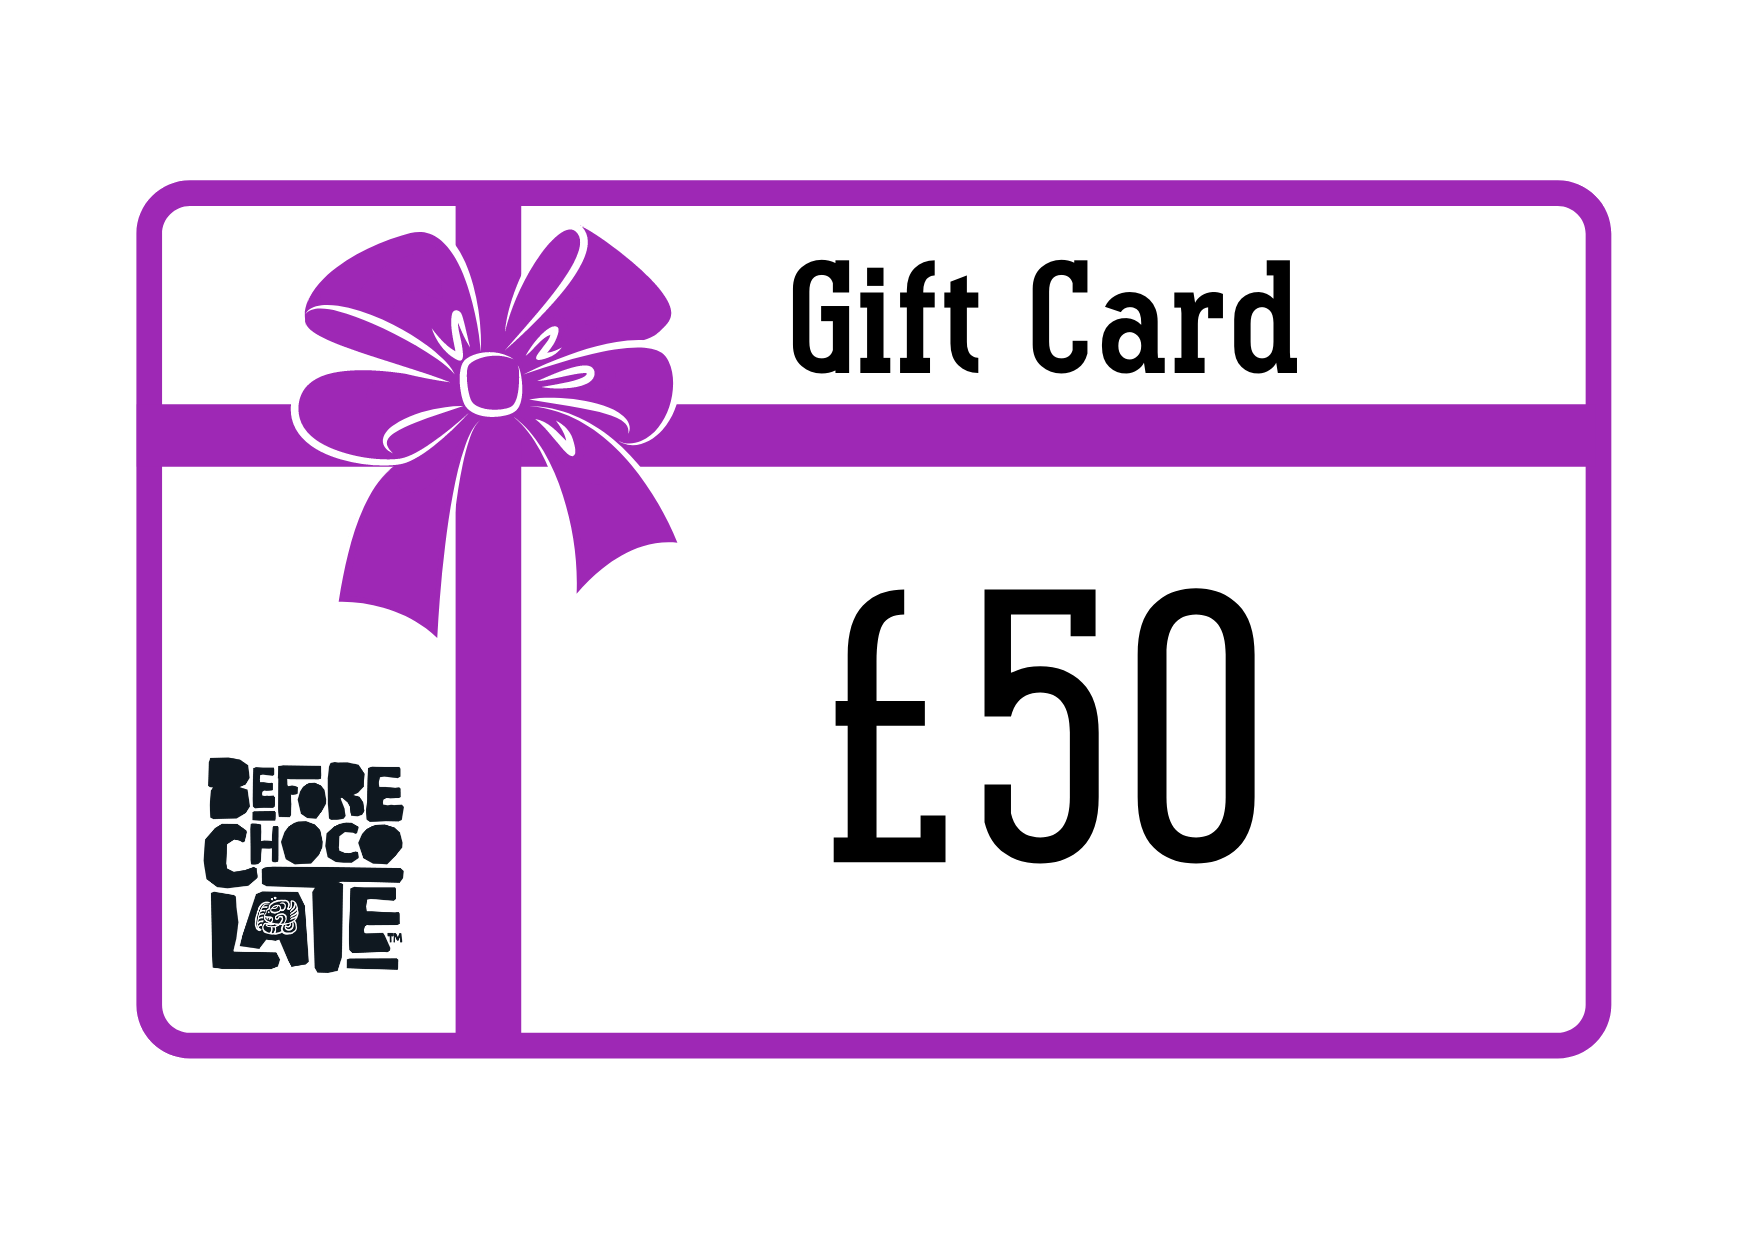 Before Chocolate Gift Card - £50